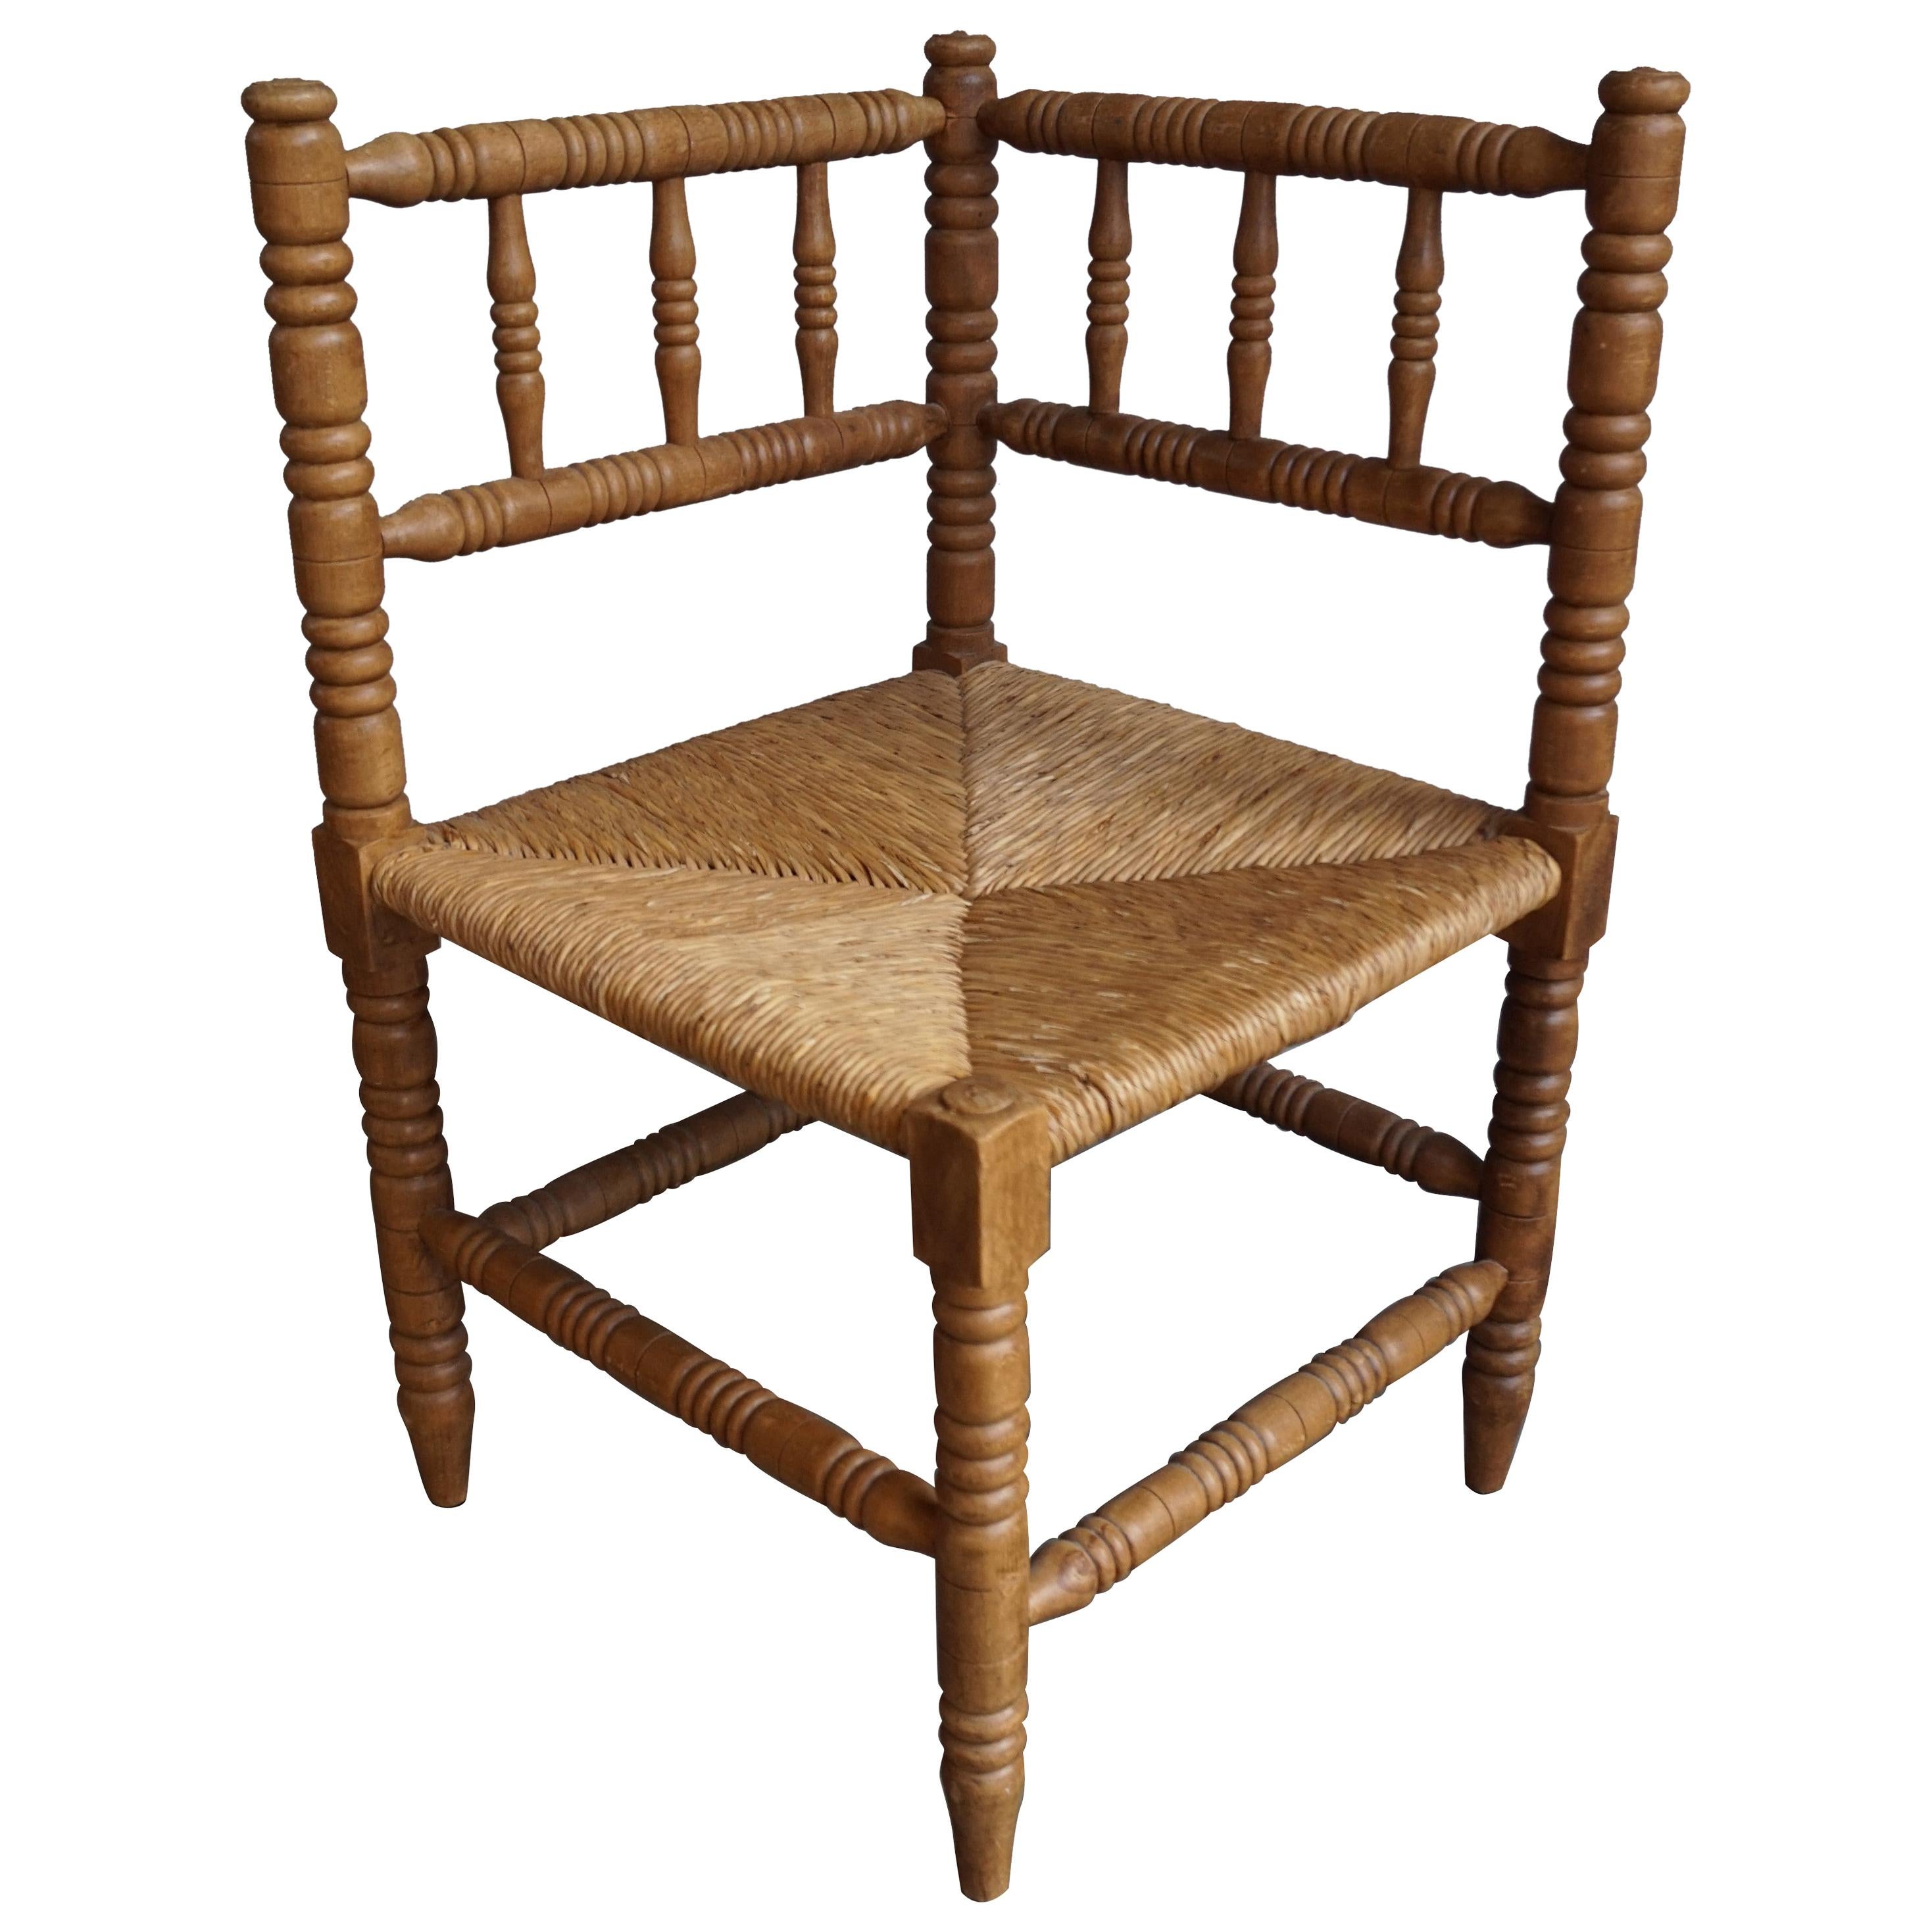 Handcrafted Antique French Provincial Corner Chair with Handwoven Rush Seat